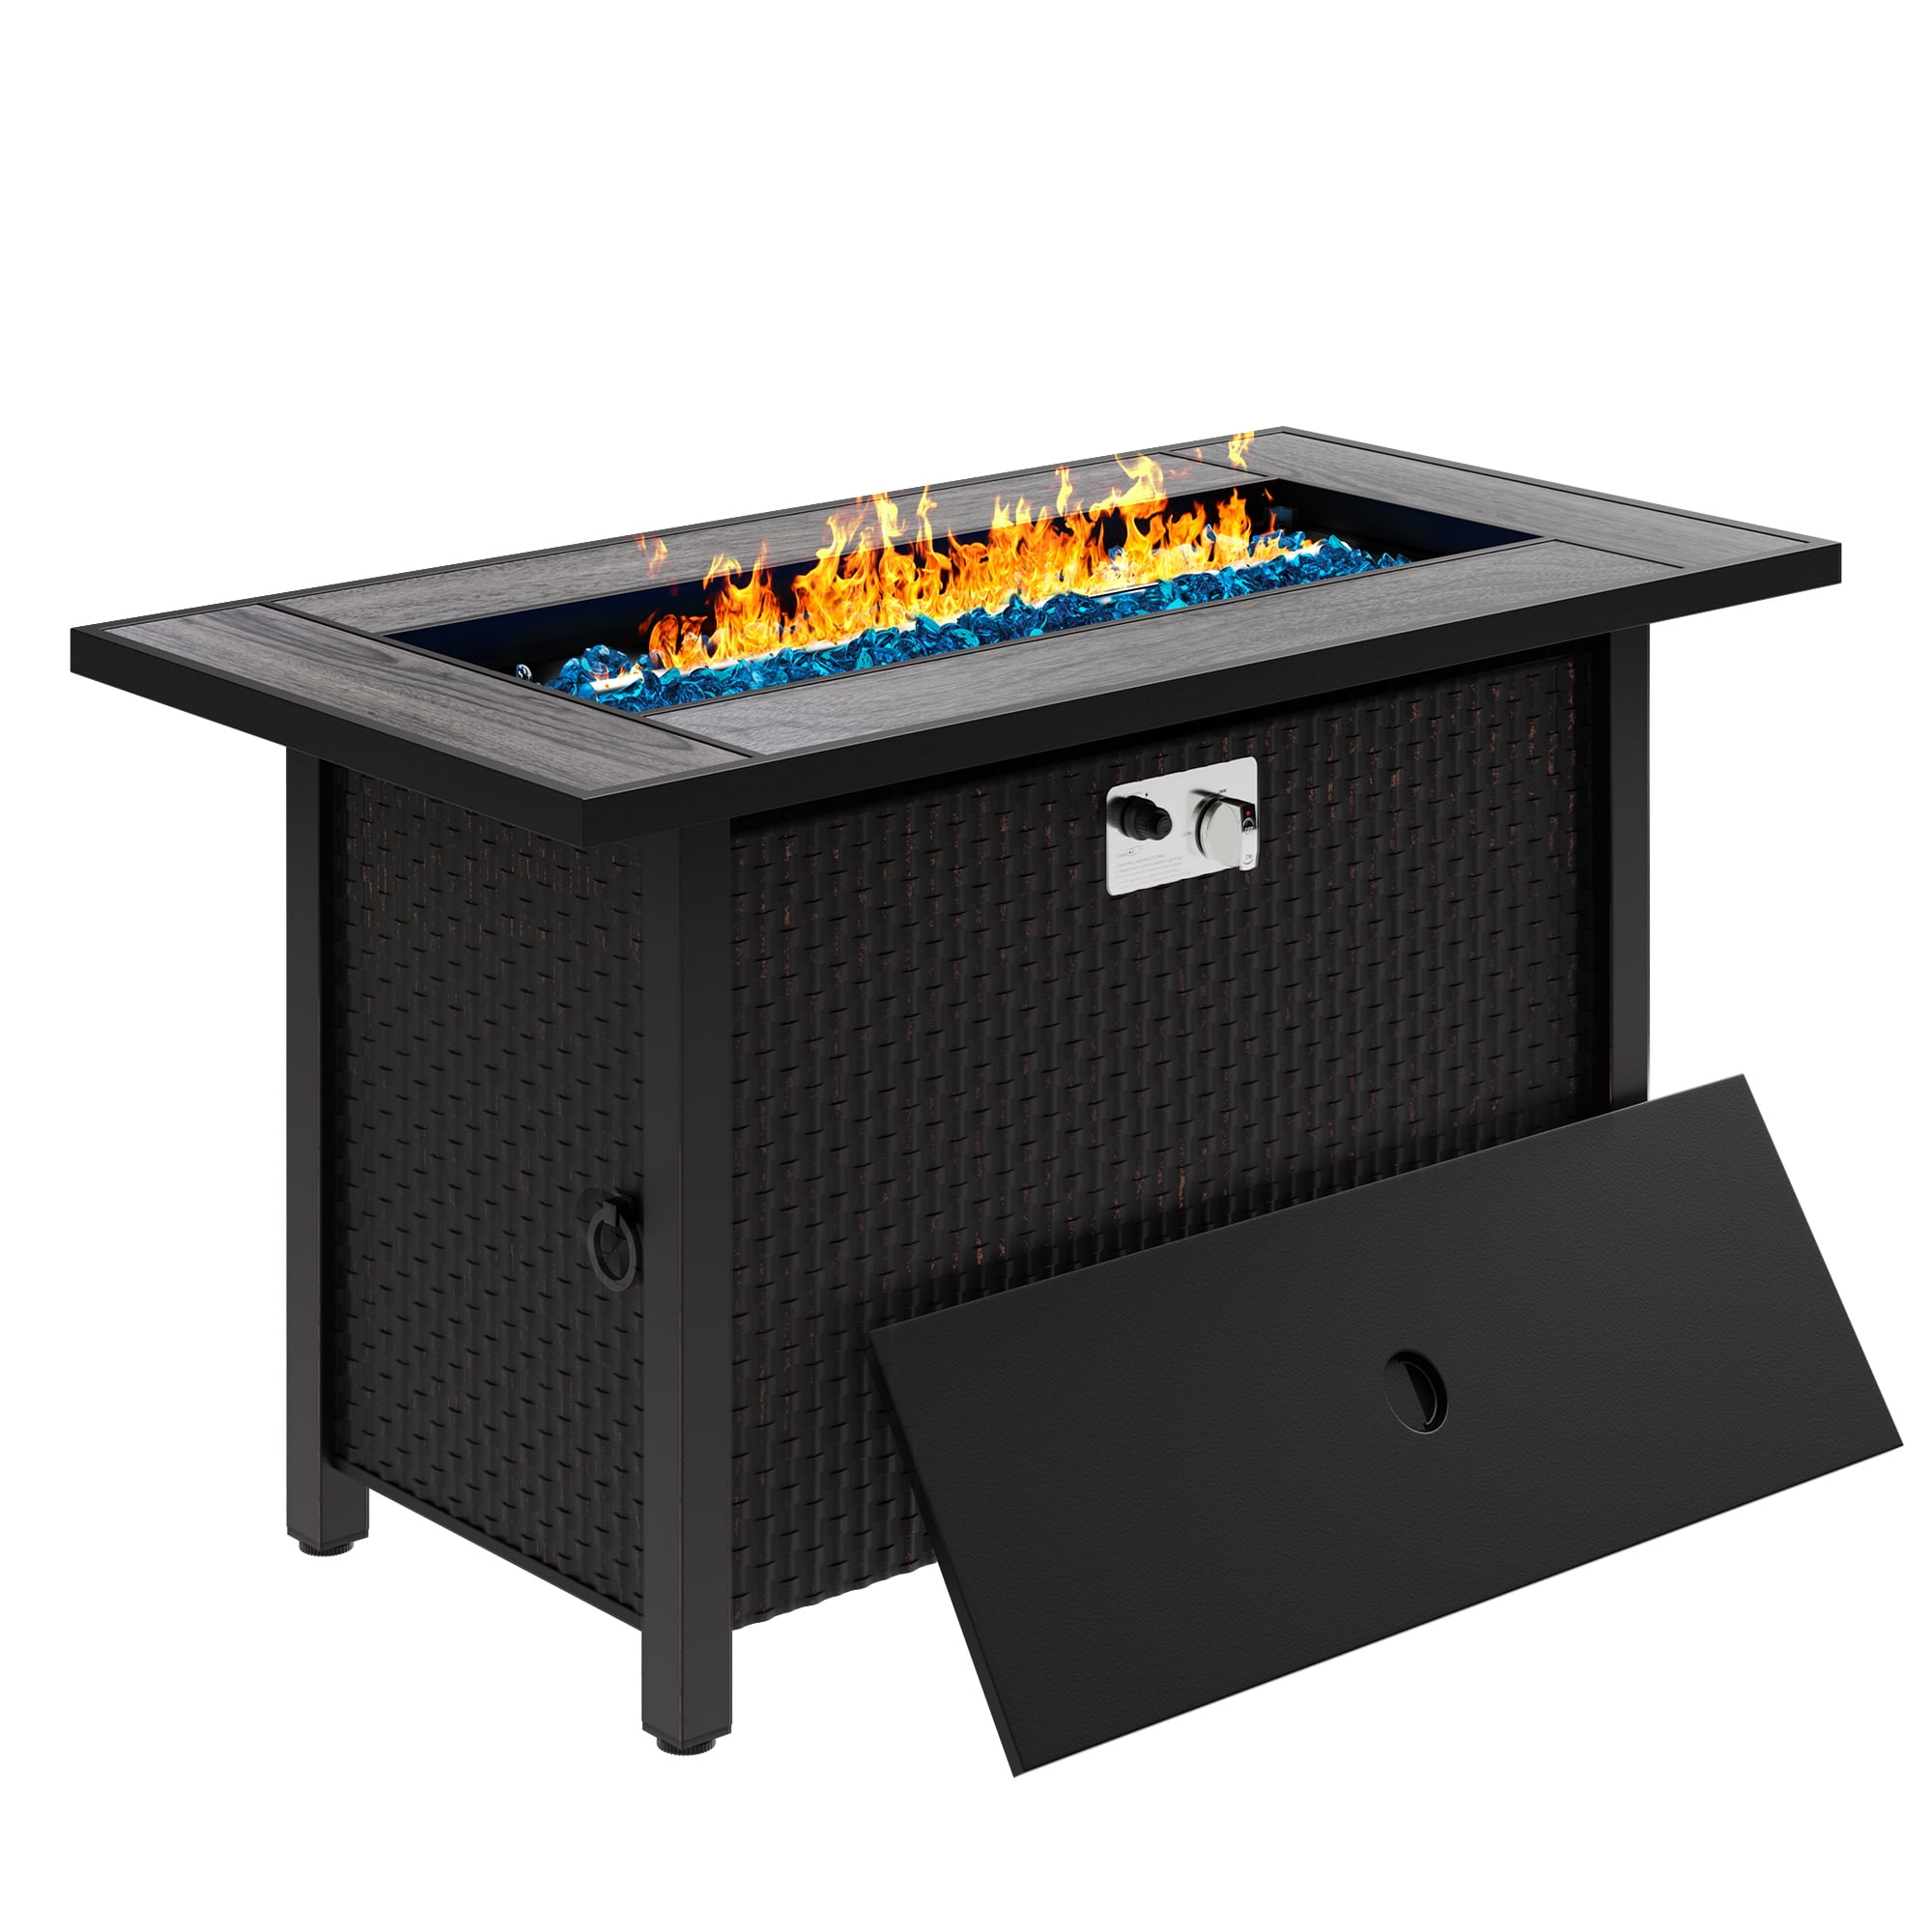 Sobaniilo Fire Pit 45in Propane Fire Pit with Rain Cover and Lava Rock ...